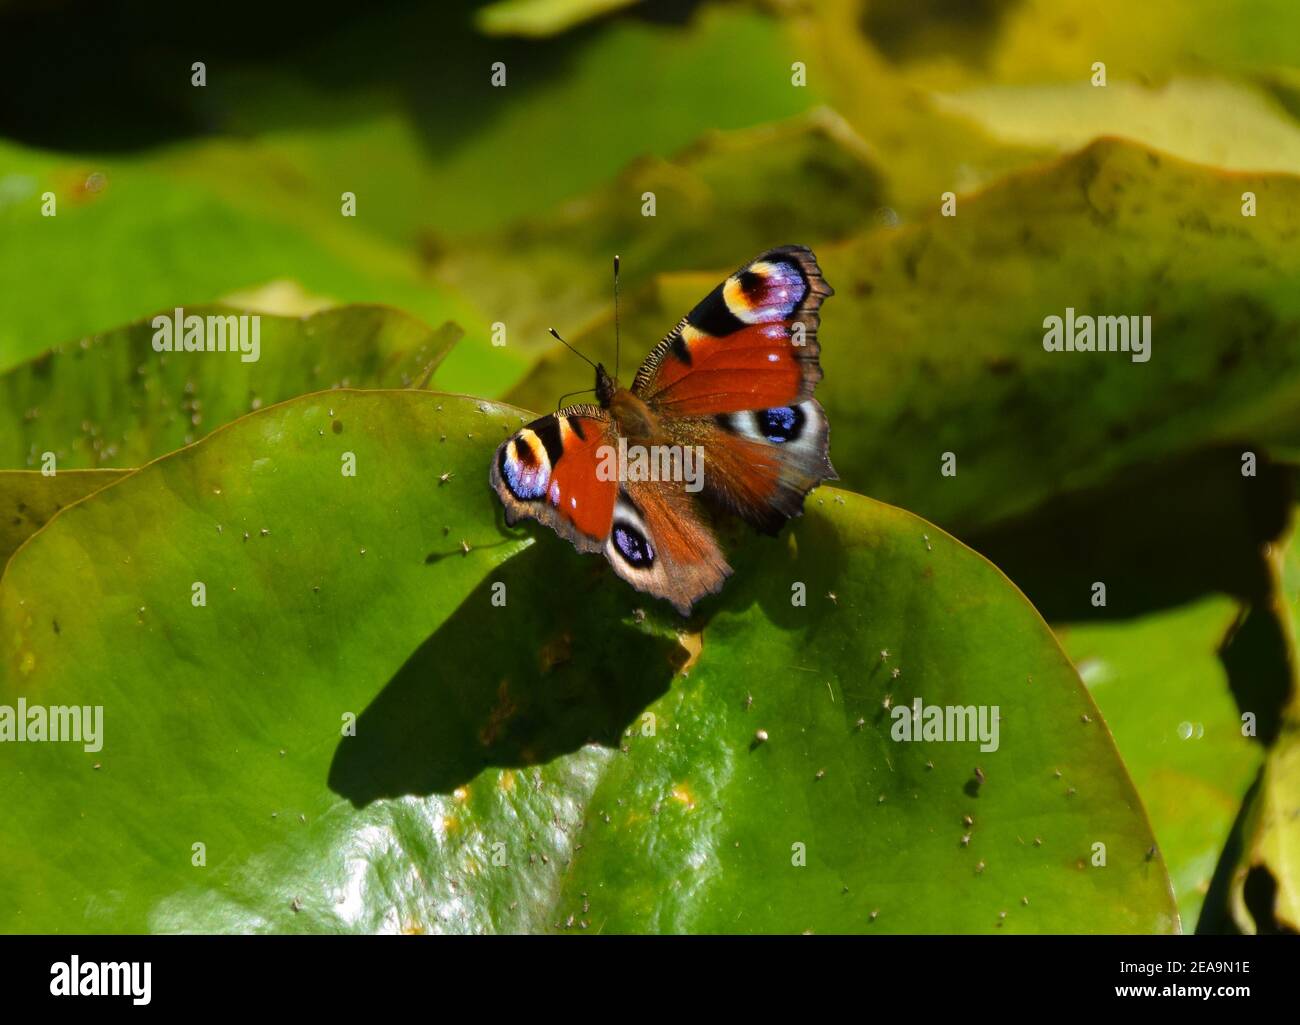 A peacock butterfly rests on a water lily leaf in a park. Stock Photo